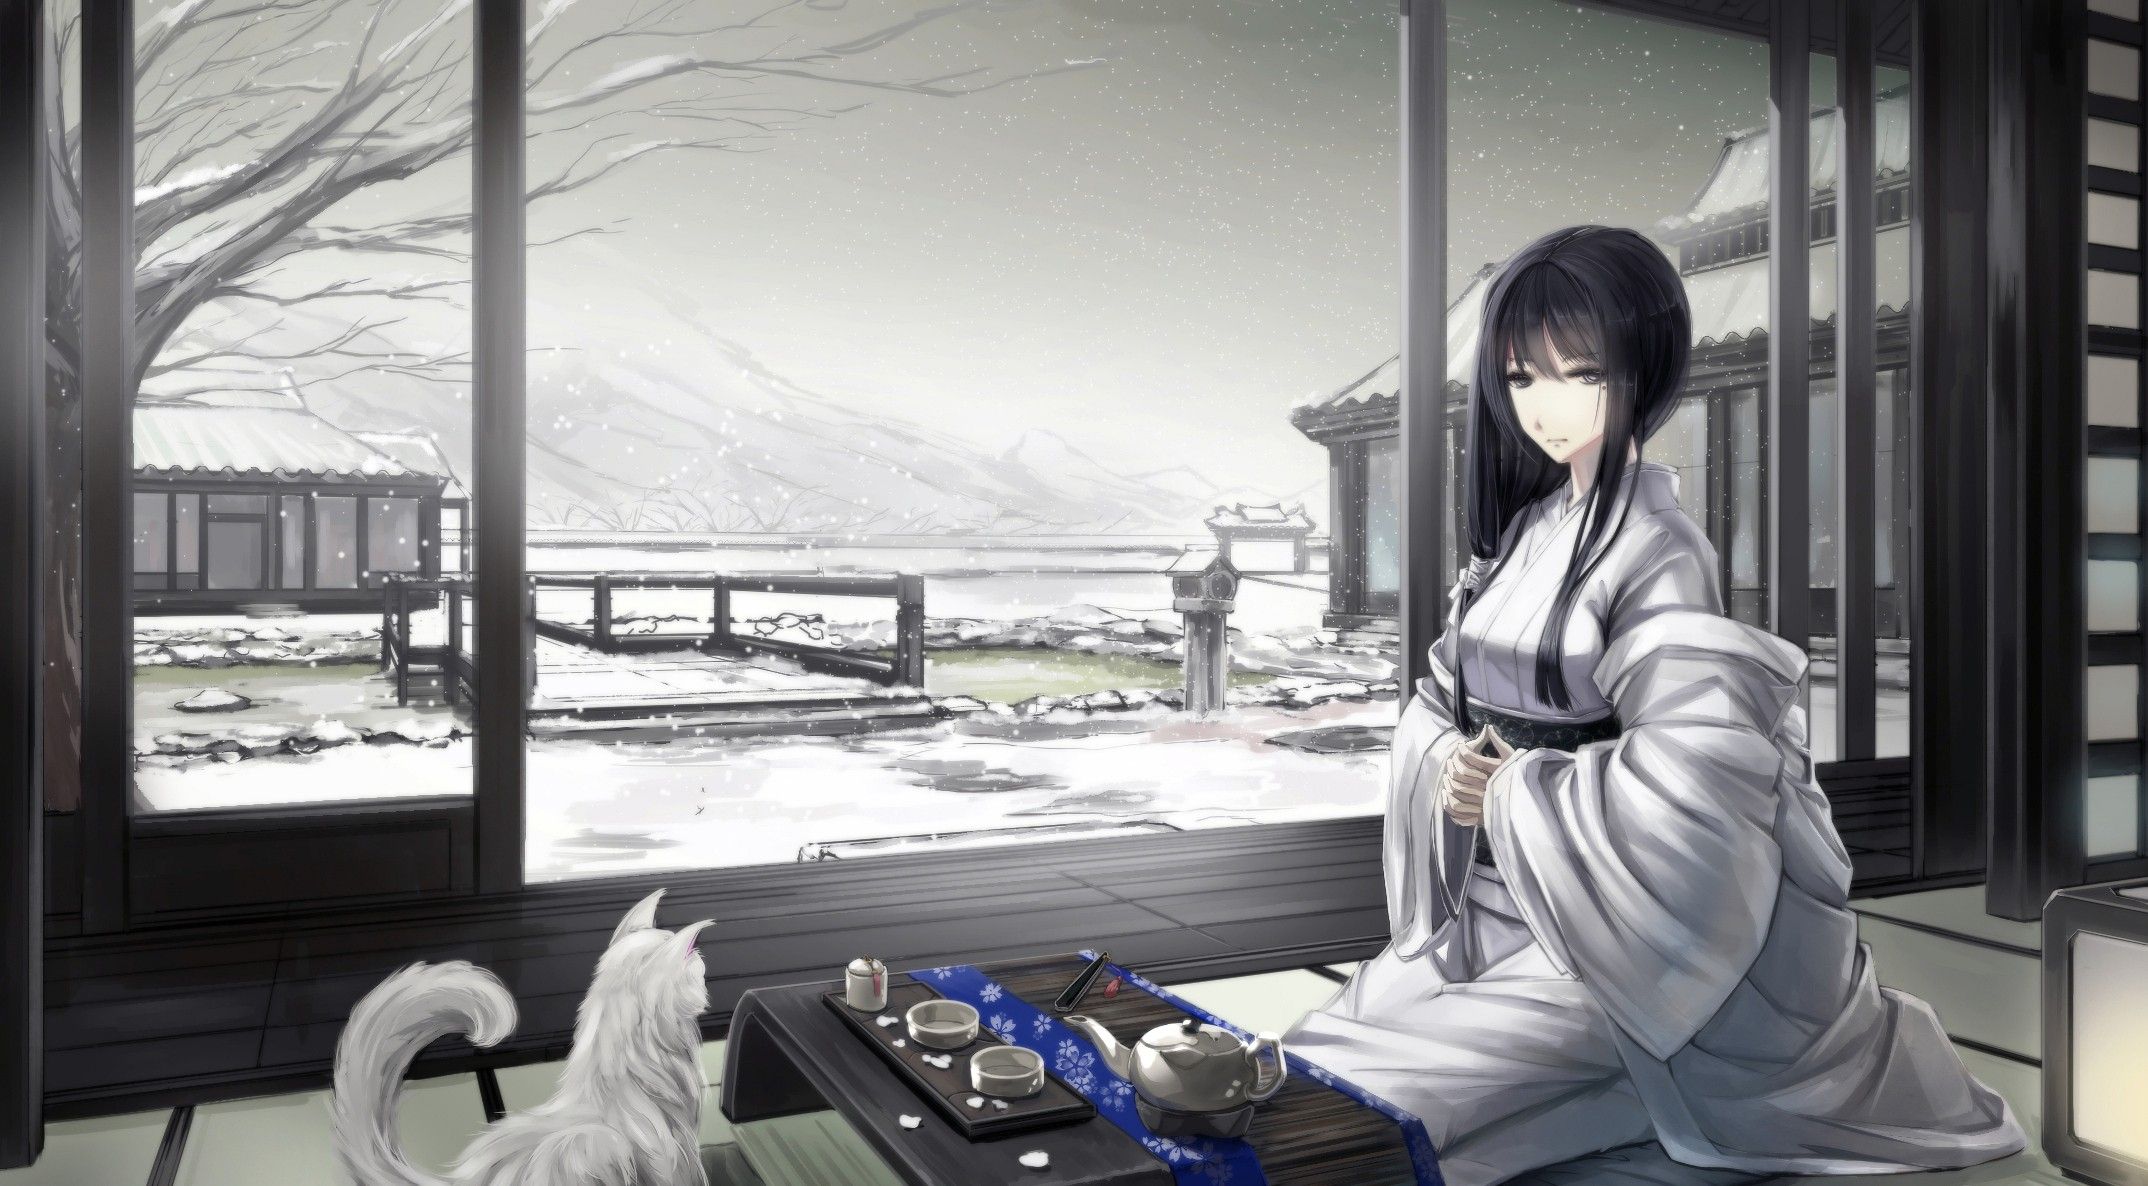 #original characters, #Asian architecture, #snow